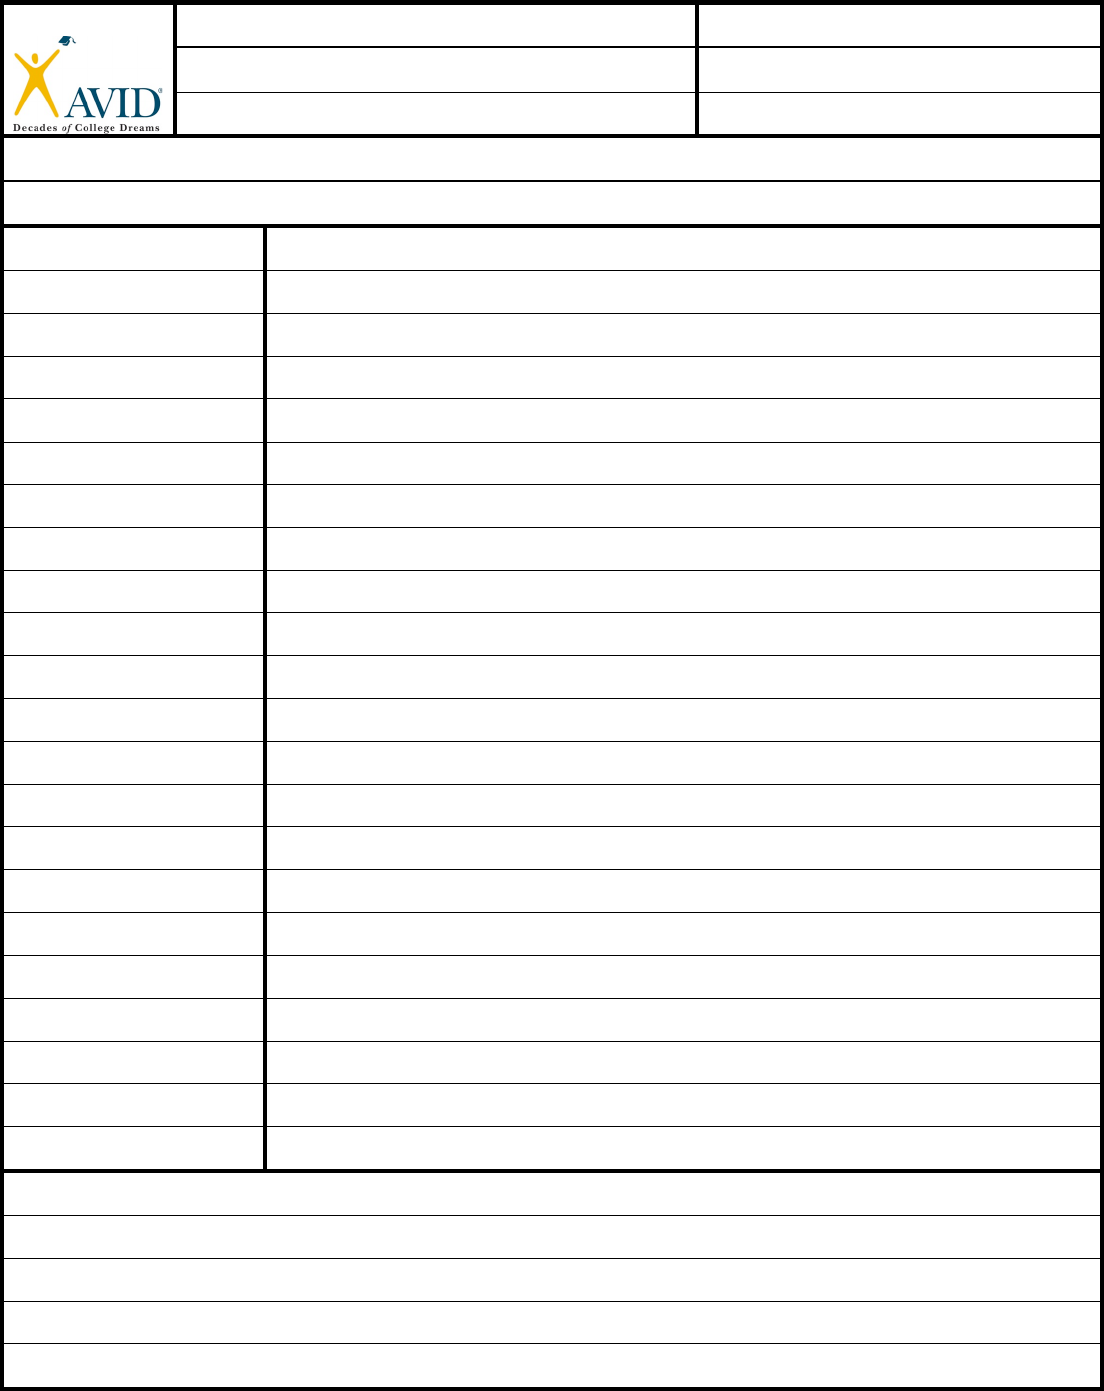 Cornell Notes Template (AVID) - Edit, Fill, Sign Online  Handypdf For Avid Cornell Note Template